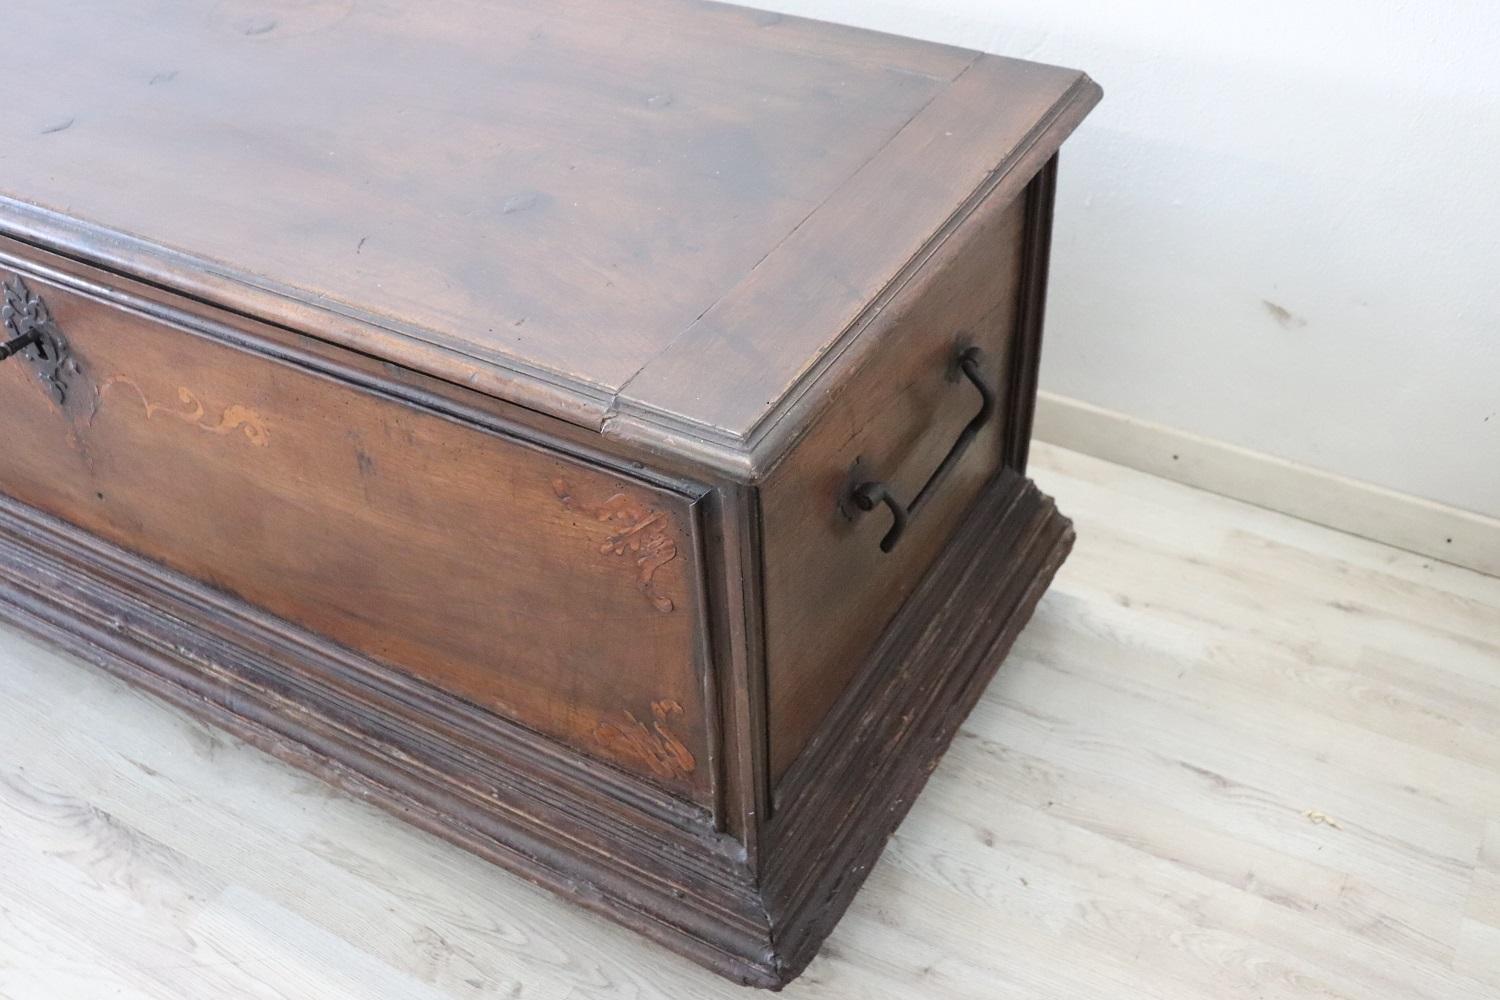 Majestic 17th Century Italian Inlaid Solid Walnut Antique Blanket Chest Restored For Sale 2